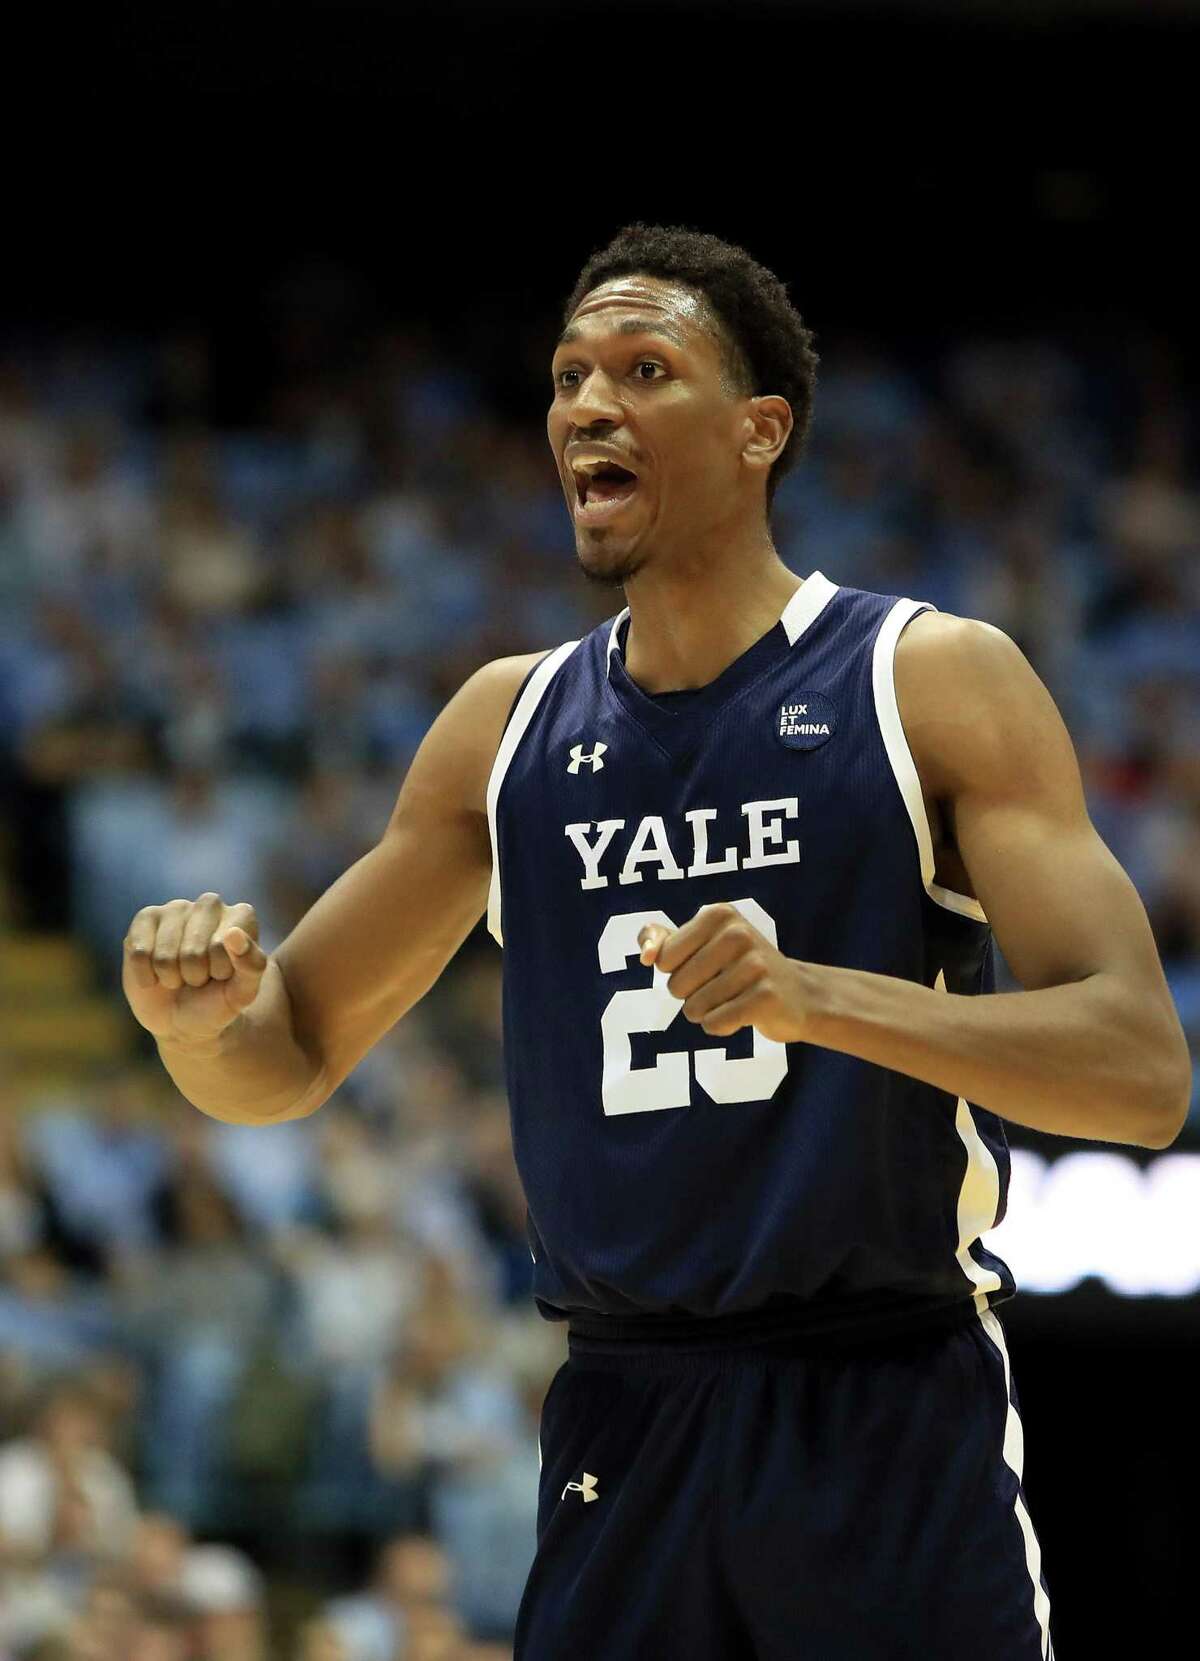 Yale’s All-Ivy League forward Jordan Bruner is planning to enter the 2020 NBA Draft.